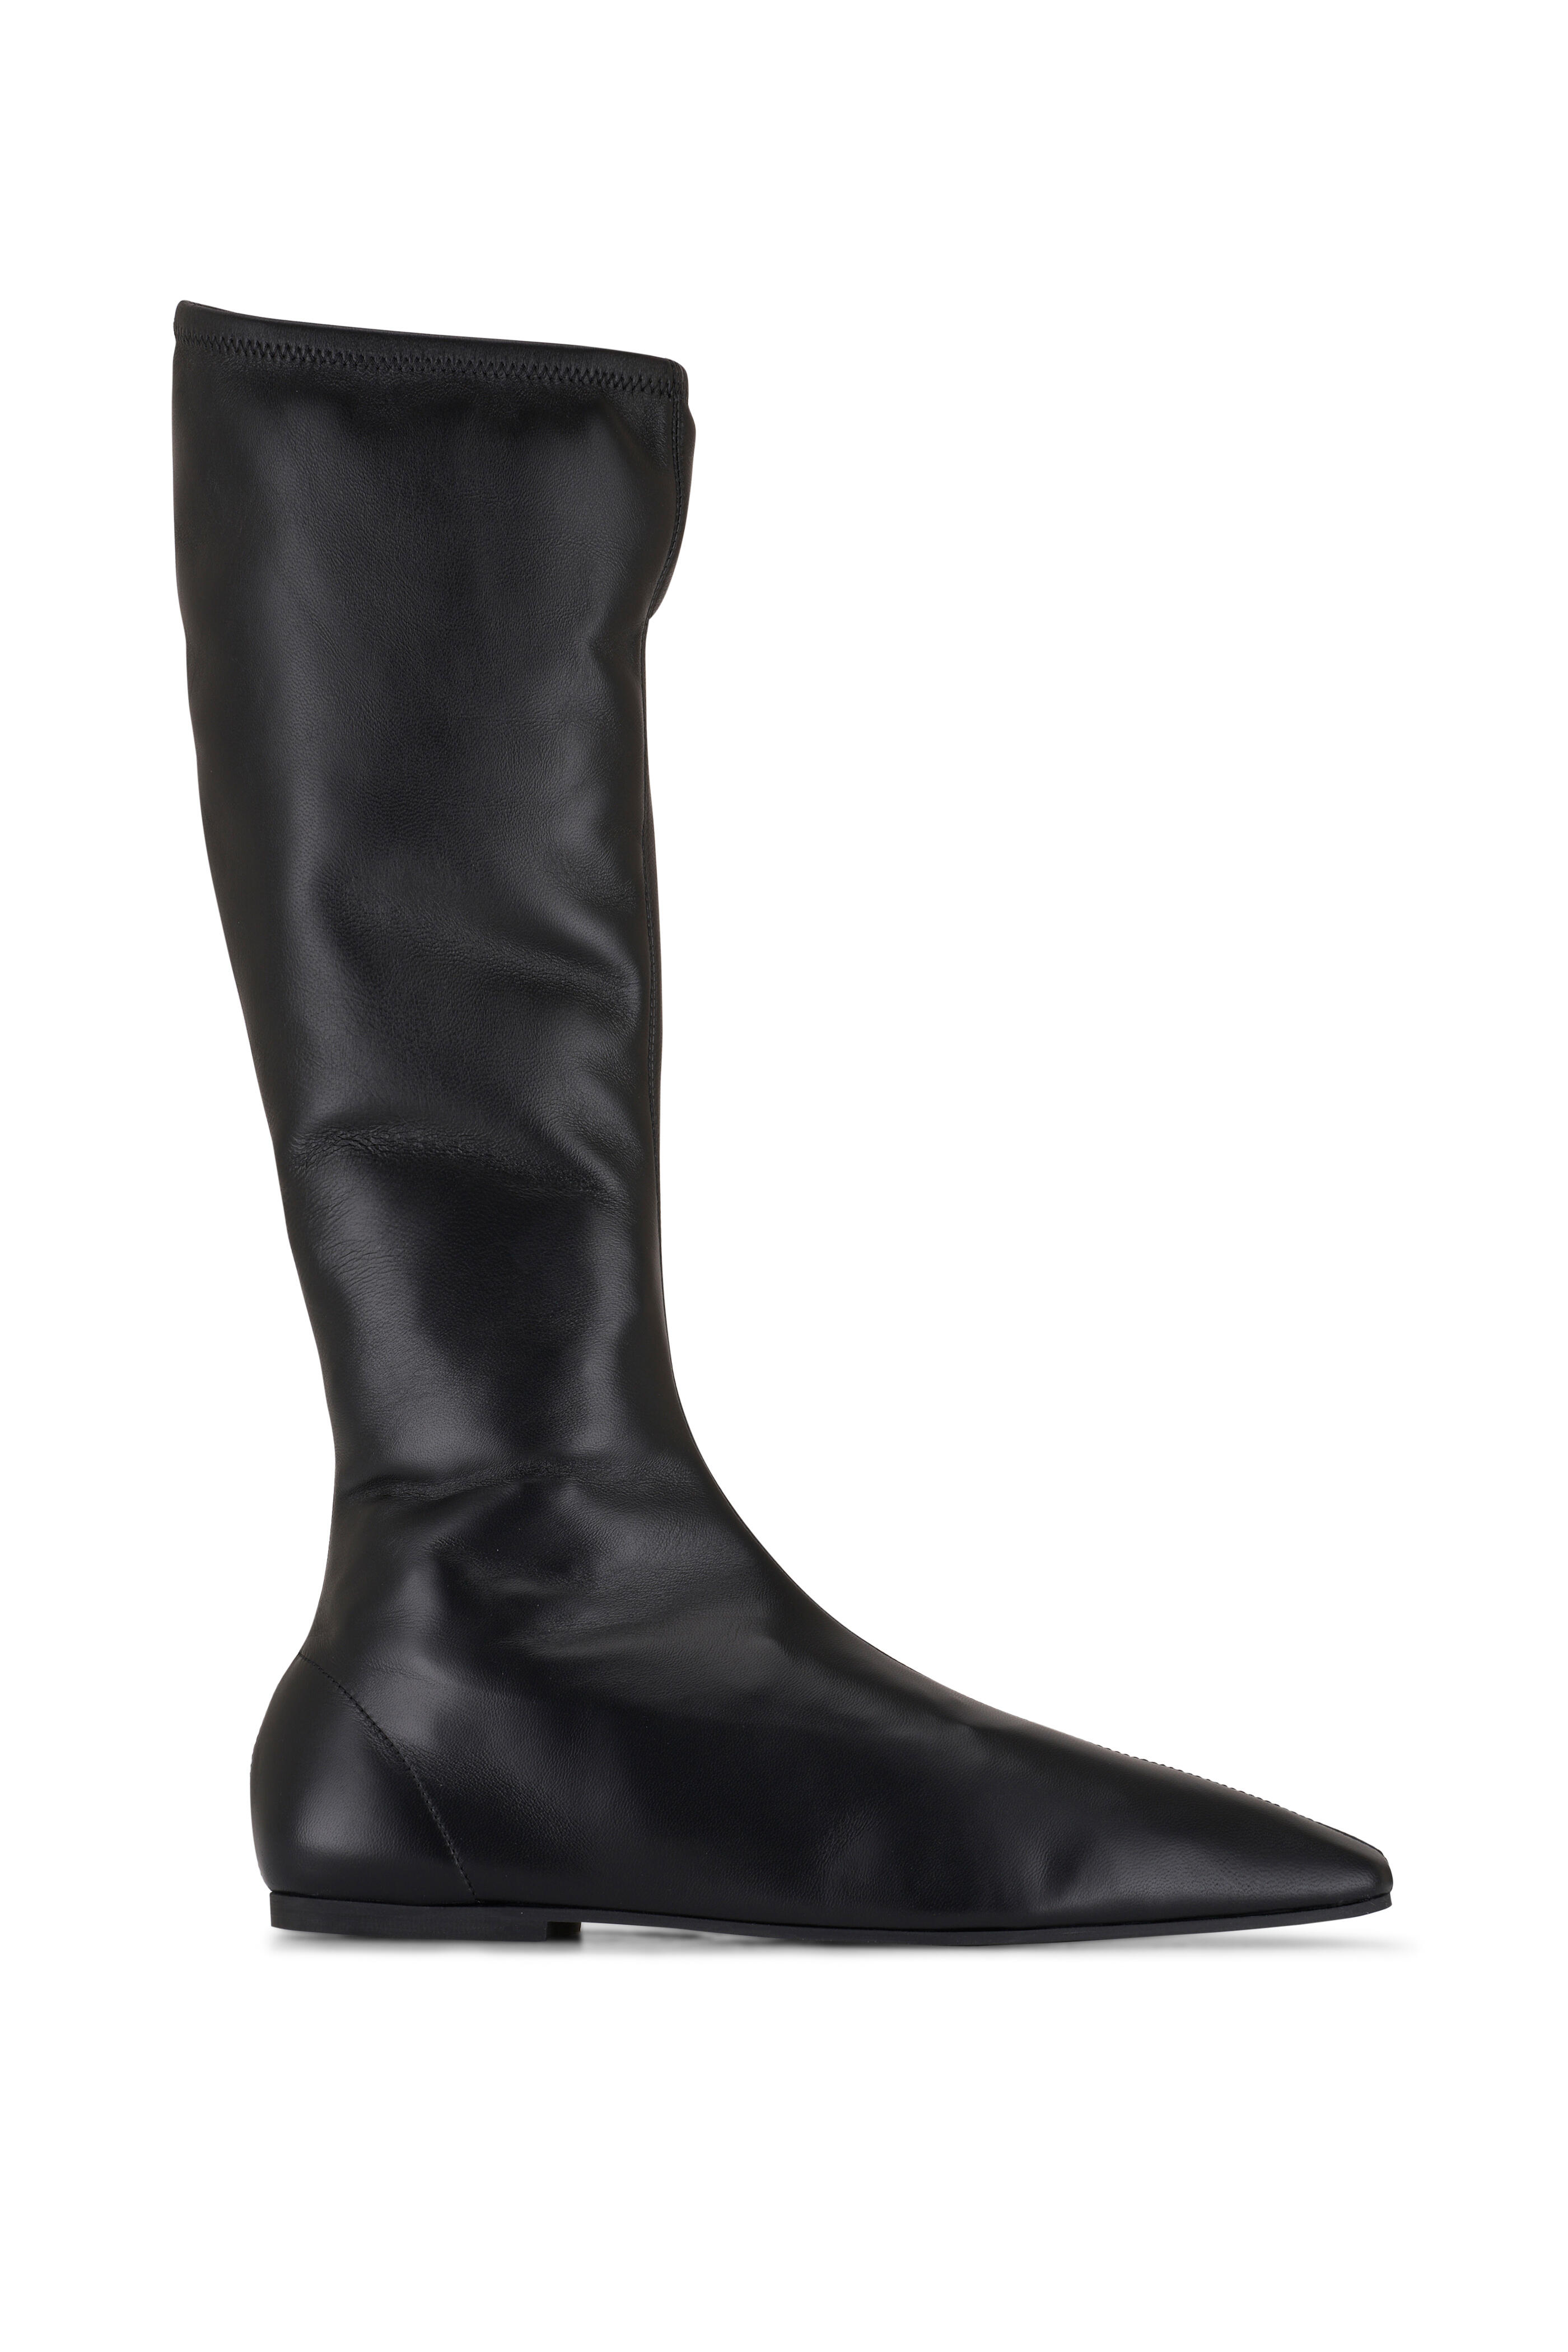 The Row - Tech Black Stretch Nappa Leather Flat Boot